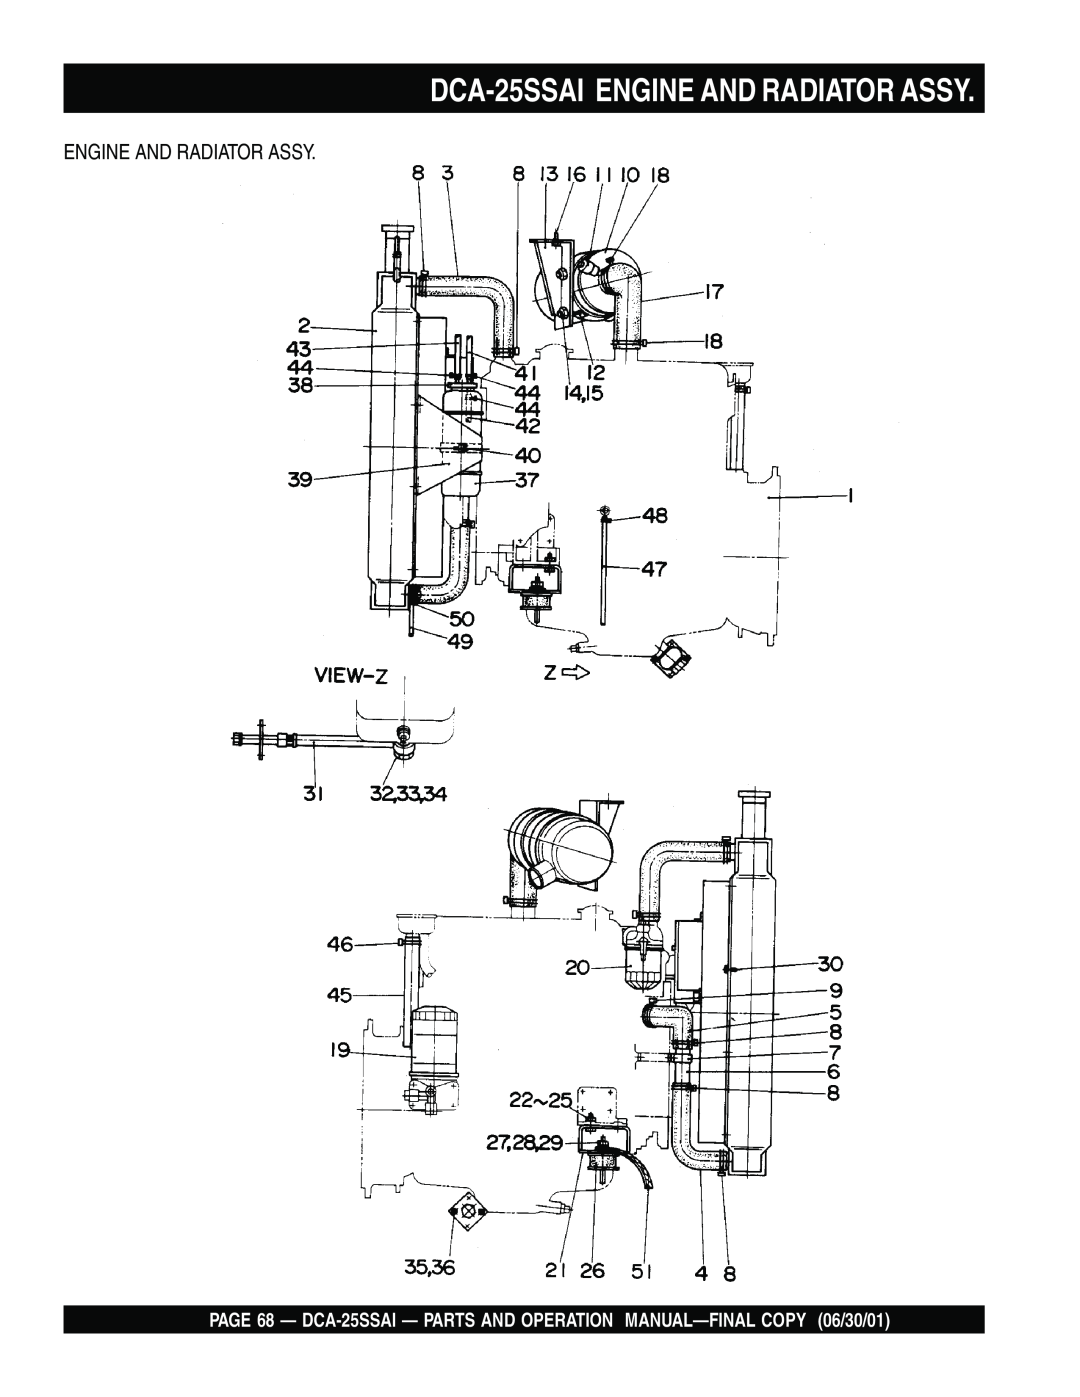 Multiquip DCA-25SSAI ENGINE AND RADIATOR ASSY, PAGE 68 - DCA-25SSAI - PARTS AND OPERATION MANUAL-FINAL COPY 06/30/01 